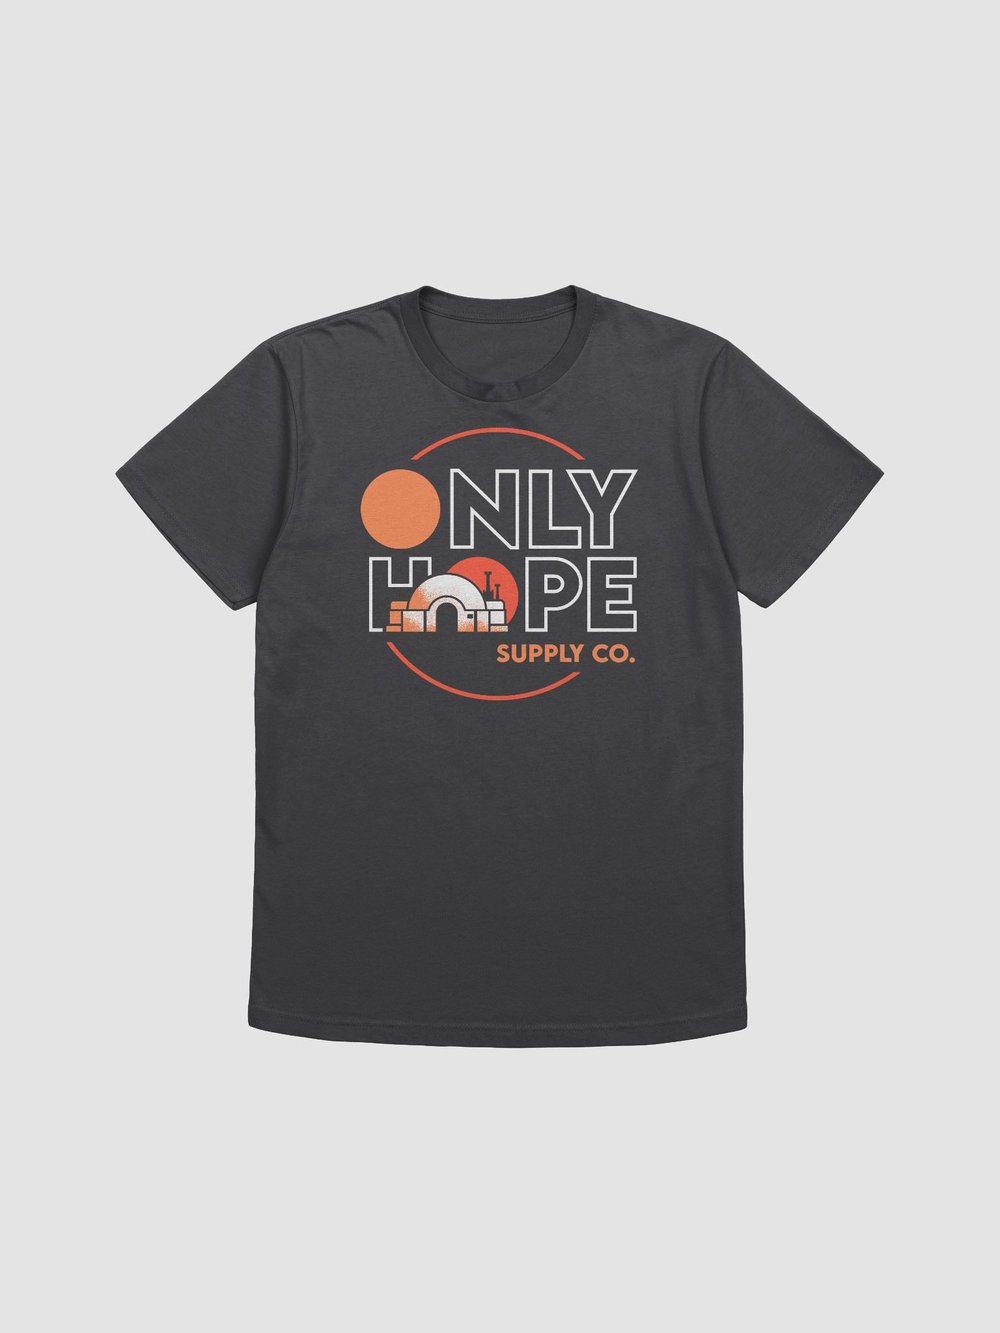 'Only Hope' Logo Tee